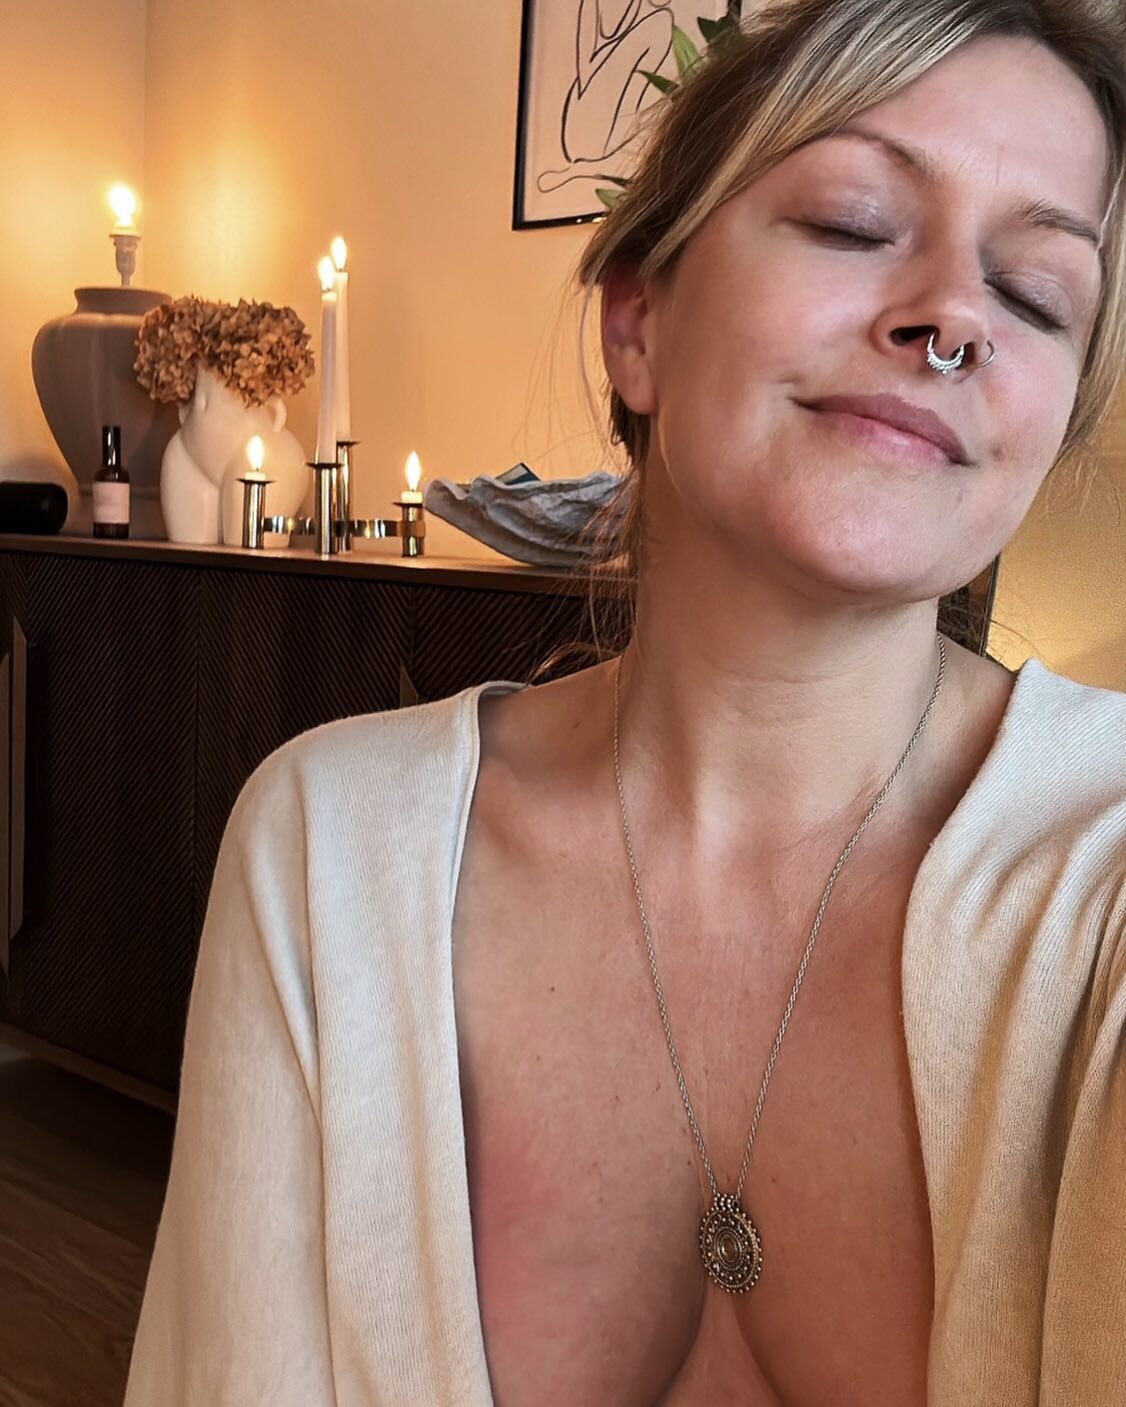 How to say &ldquo;I can&rsquo;t come out tonight because I&rsquo;m getting naked in my living room and praying to the goddess within me&rdquo;.

New moon feels and gosh, I&rsquo;m feeling a lot! But who isn&rsquo;t really&hellip; ever? When you decid